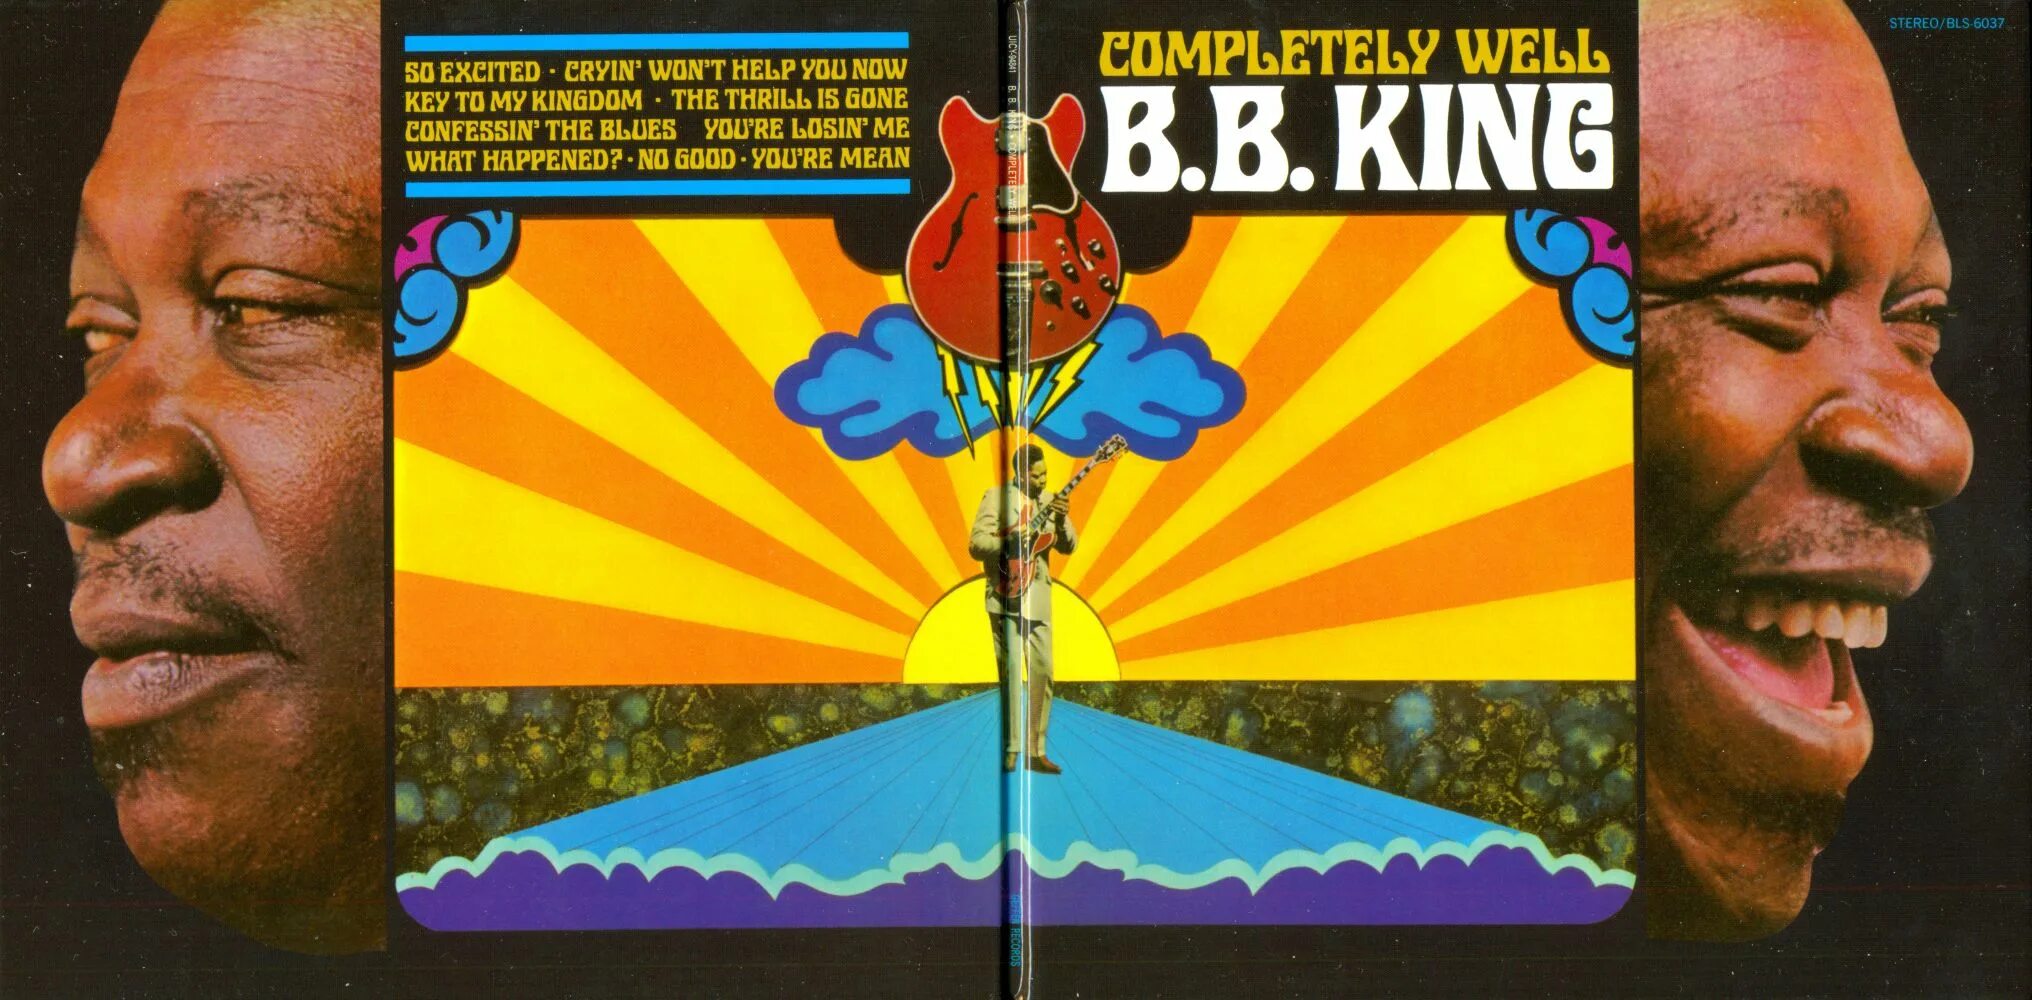 Completing the well. BB King 1969 completely well. B.B. King completely well. Completely well. Обложки альбомов Биби Кинга.